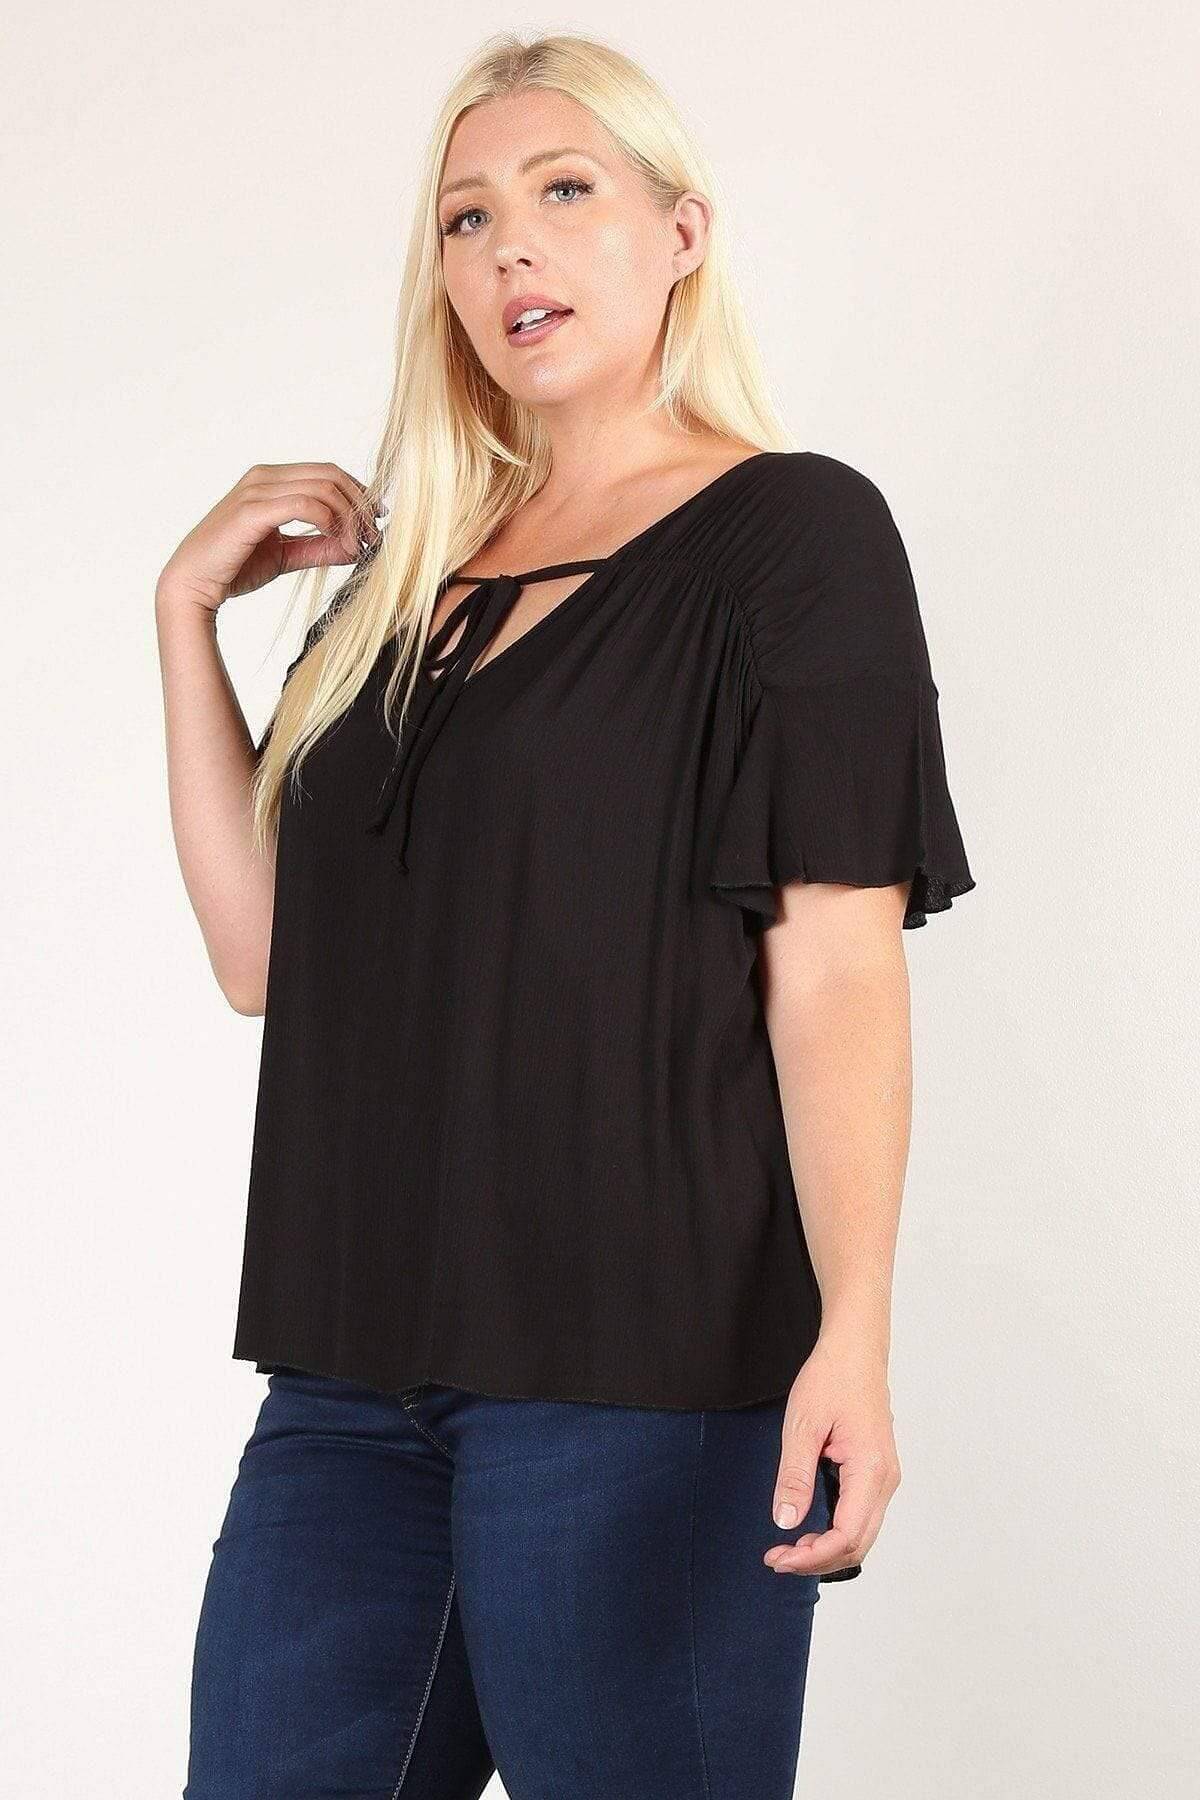 Black 3/4 Ruched Sleeve Plus Top - Shopping Therapy 2XL Top